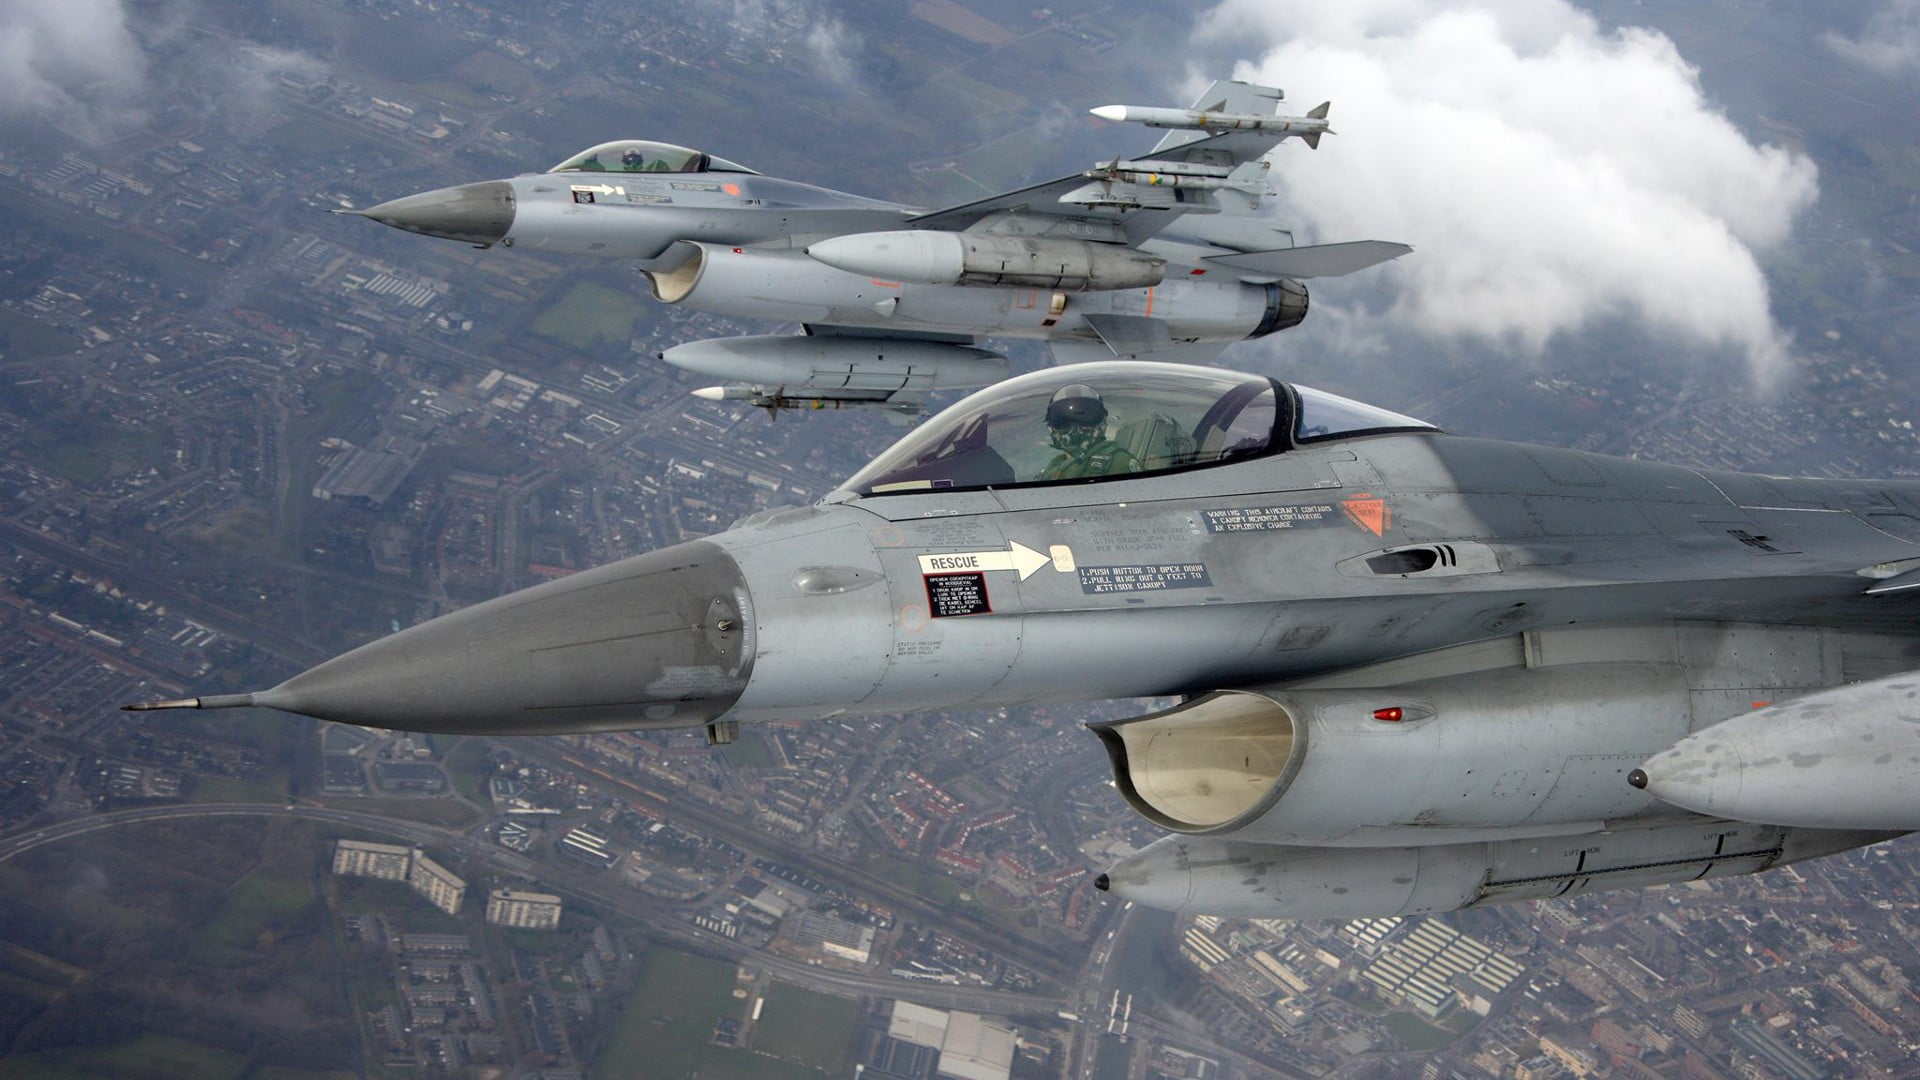 grey fighter jets, military, military aircraft, jet fighter, Royal Netherlands Air Force